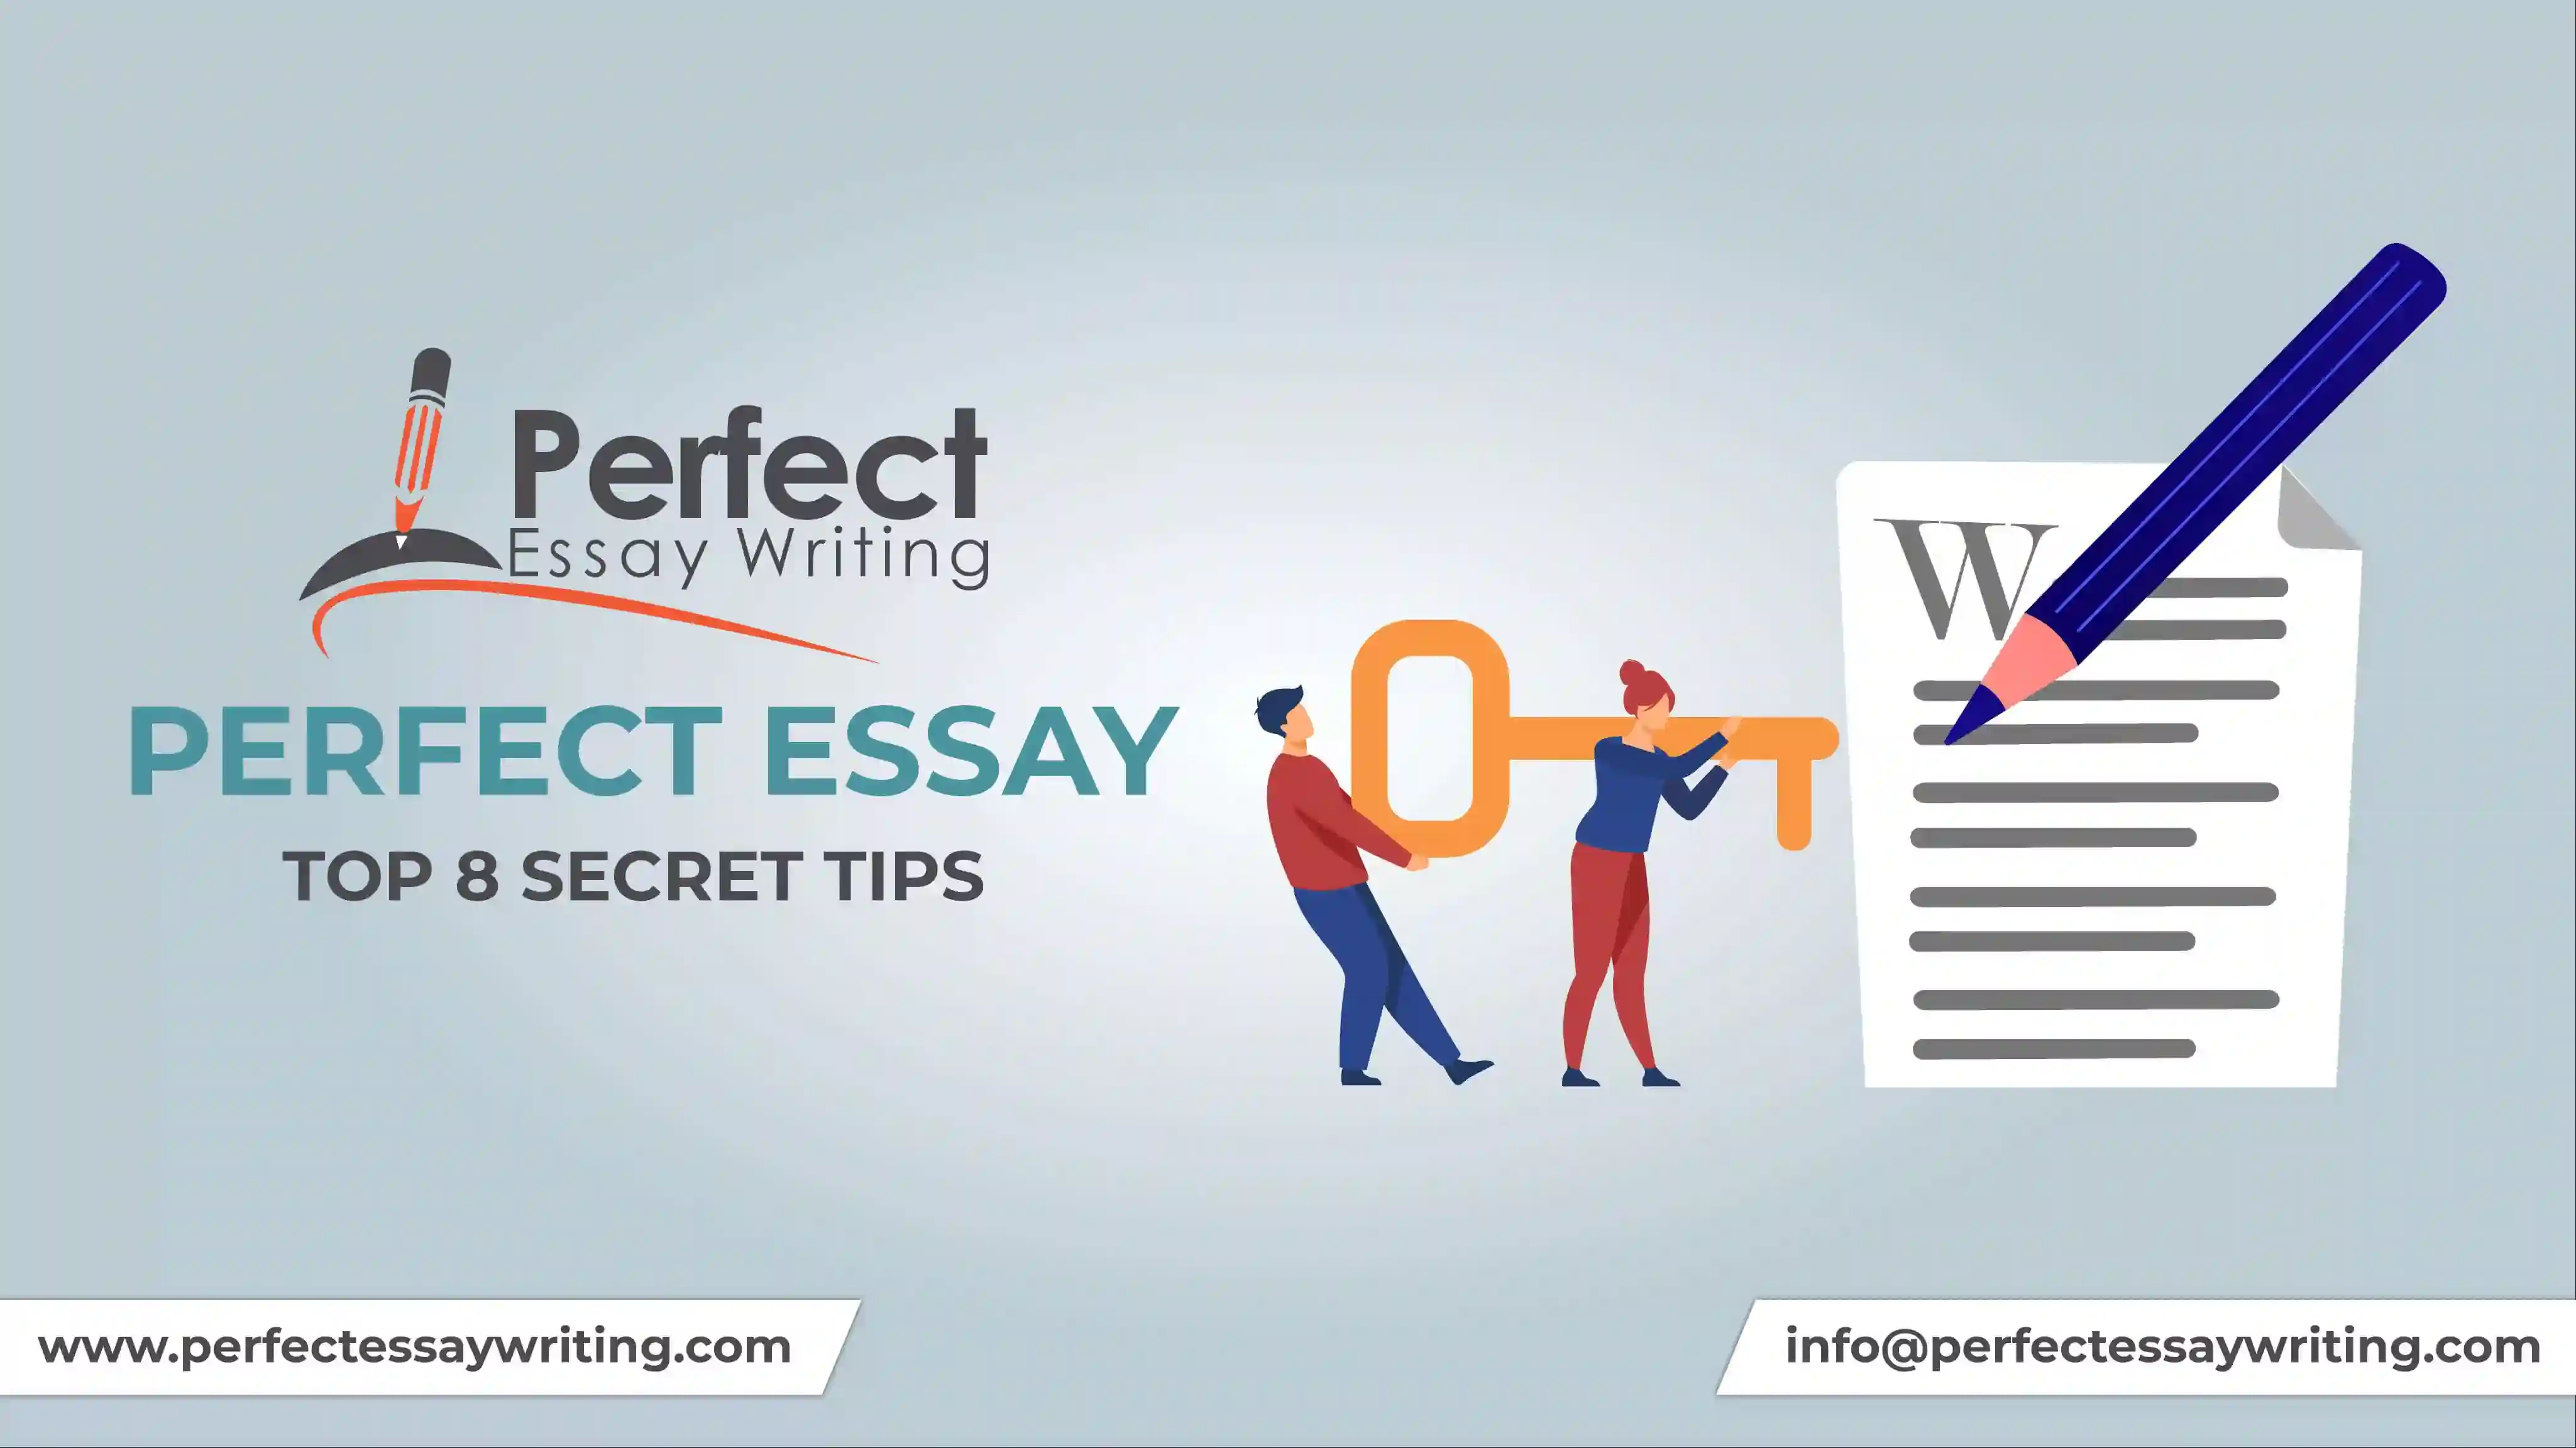 Top 8 Secret Tips for Writing a Perfect Essay